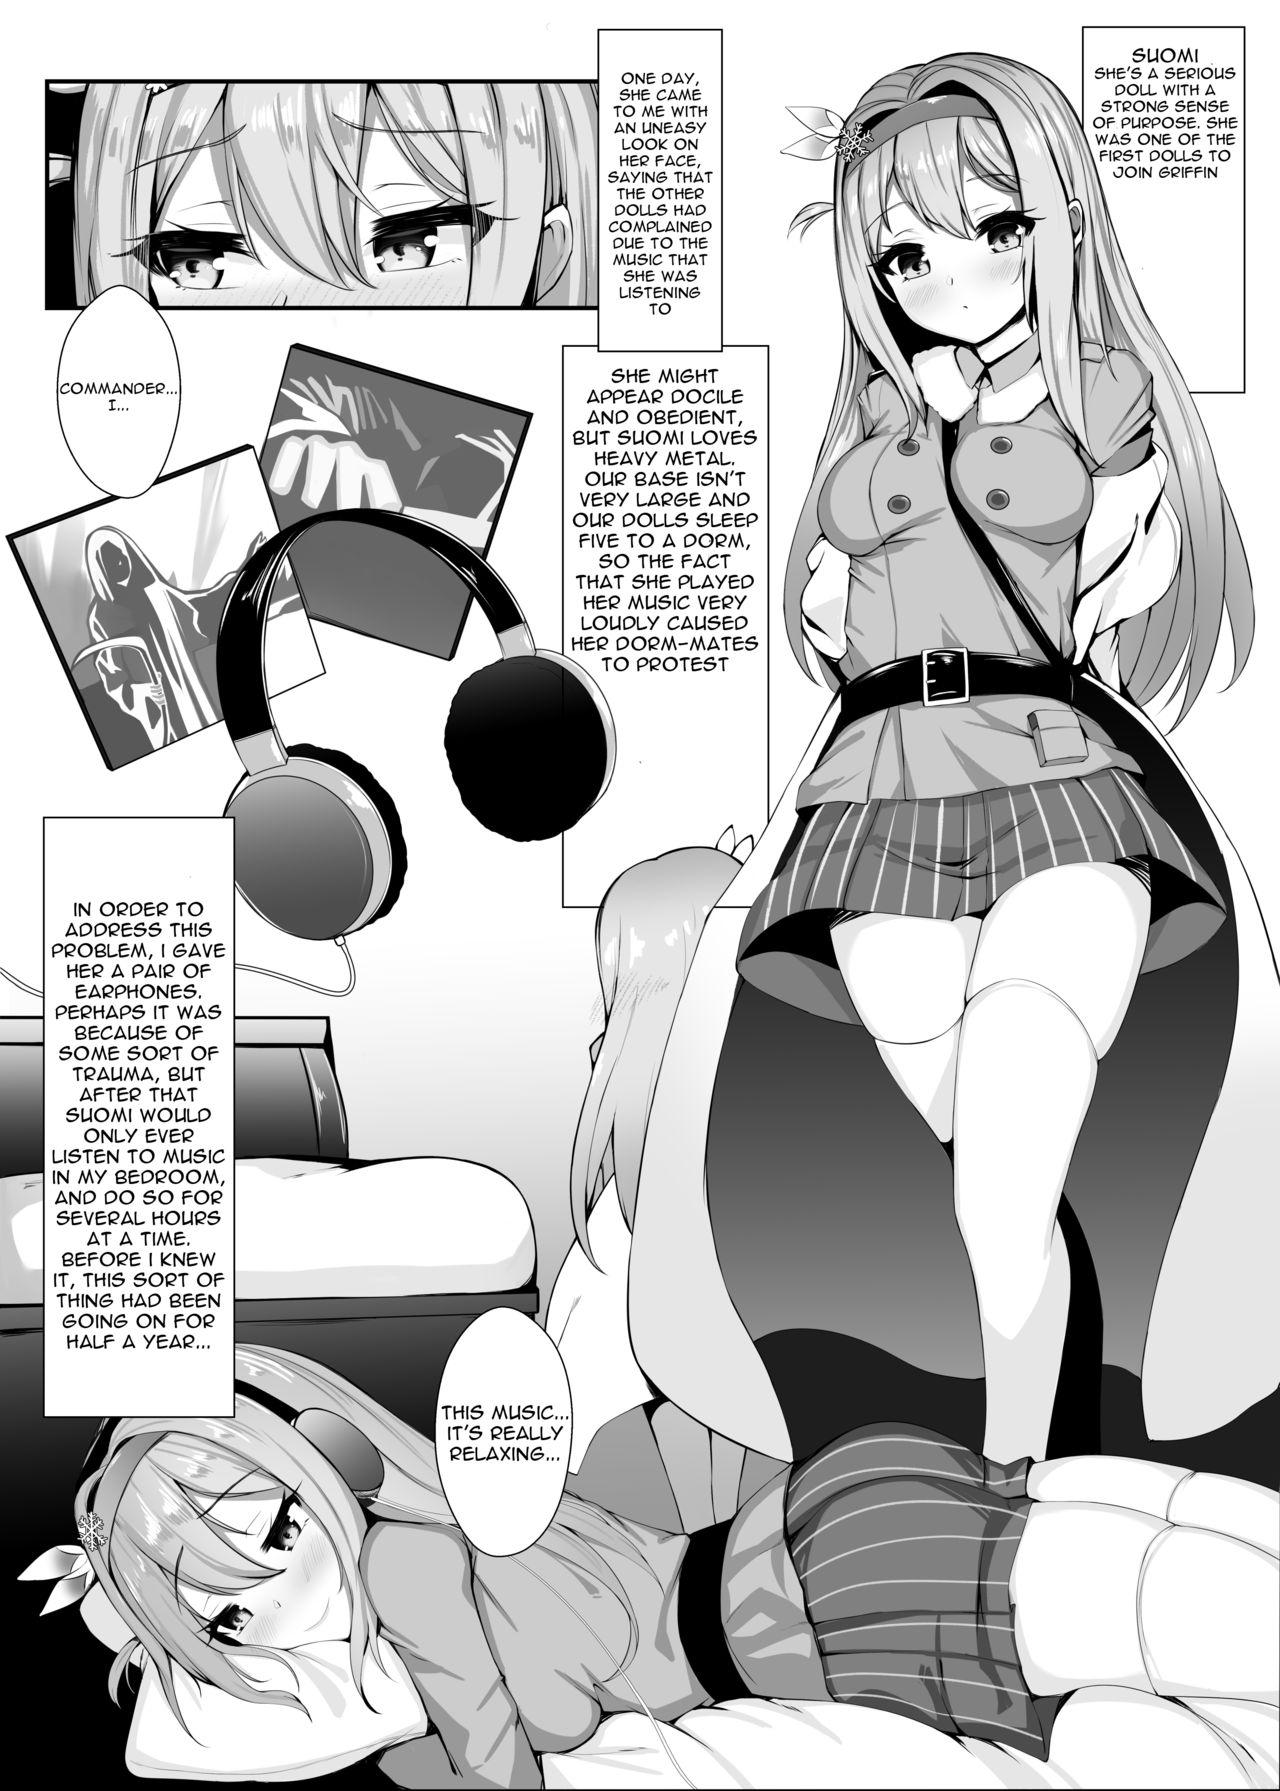 Kink Suomi - Mission of Love - Girls frontline Free Blowjob Porn - Page 4